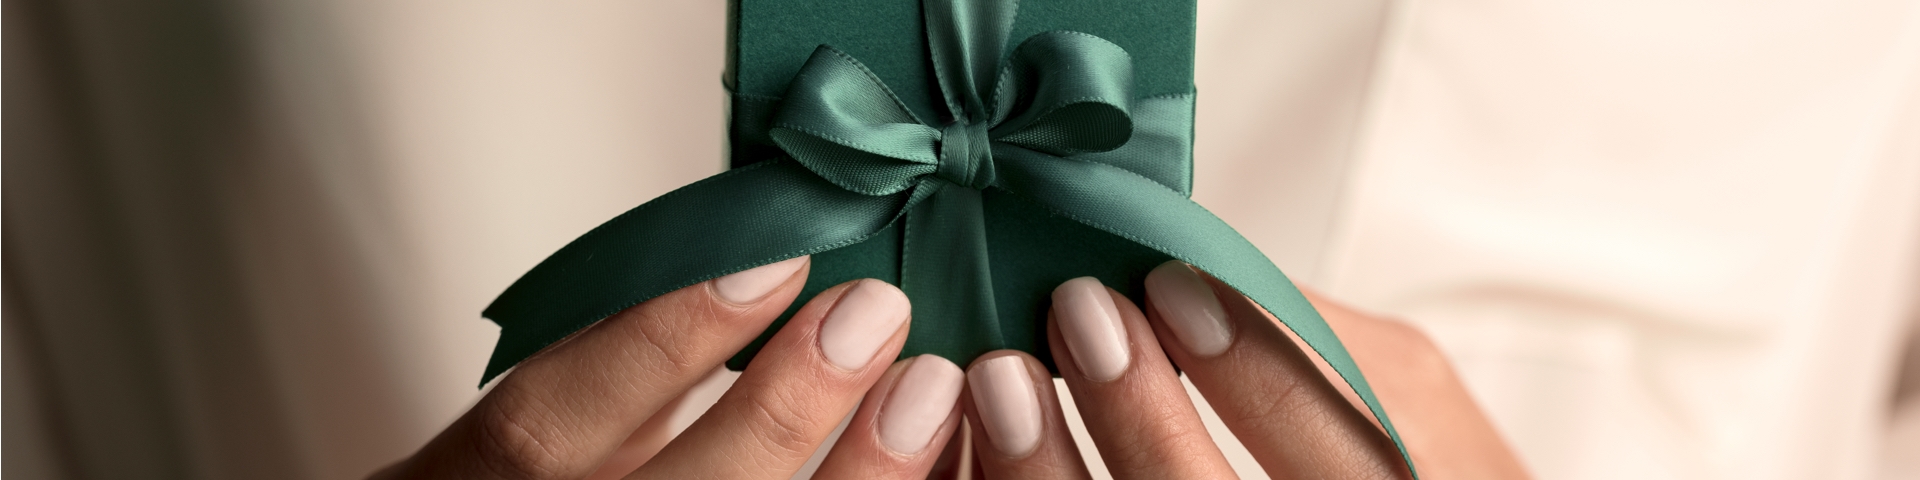 Woman holding a green gift box with green ribbon and bow in her hands